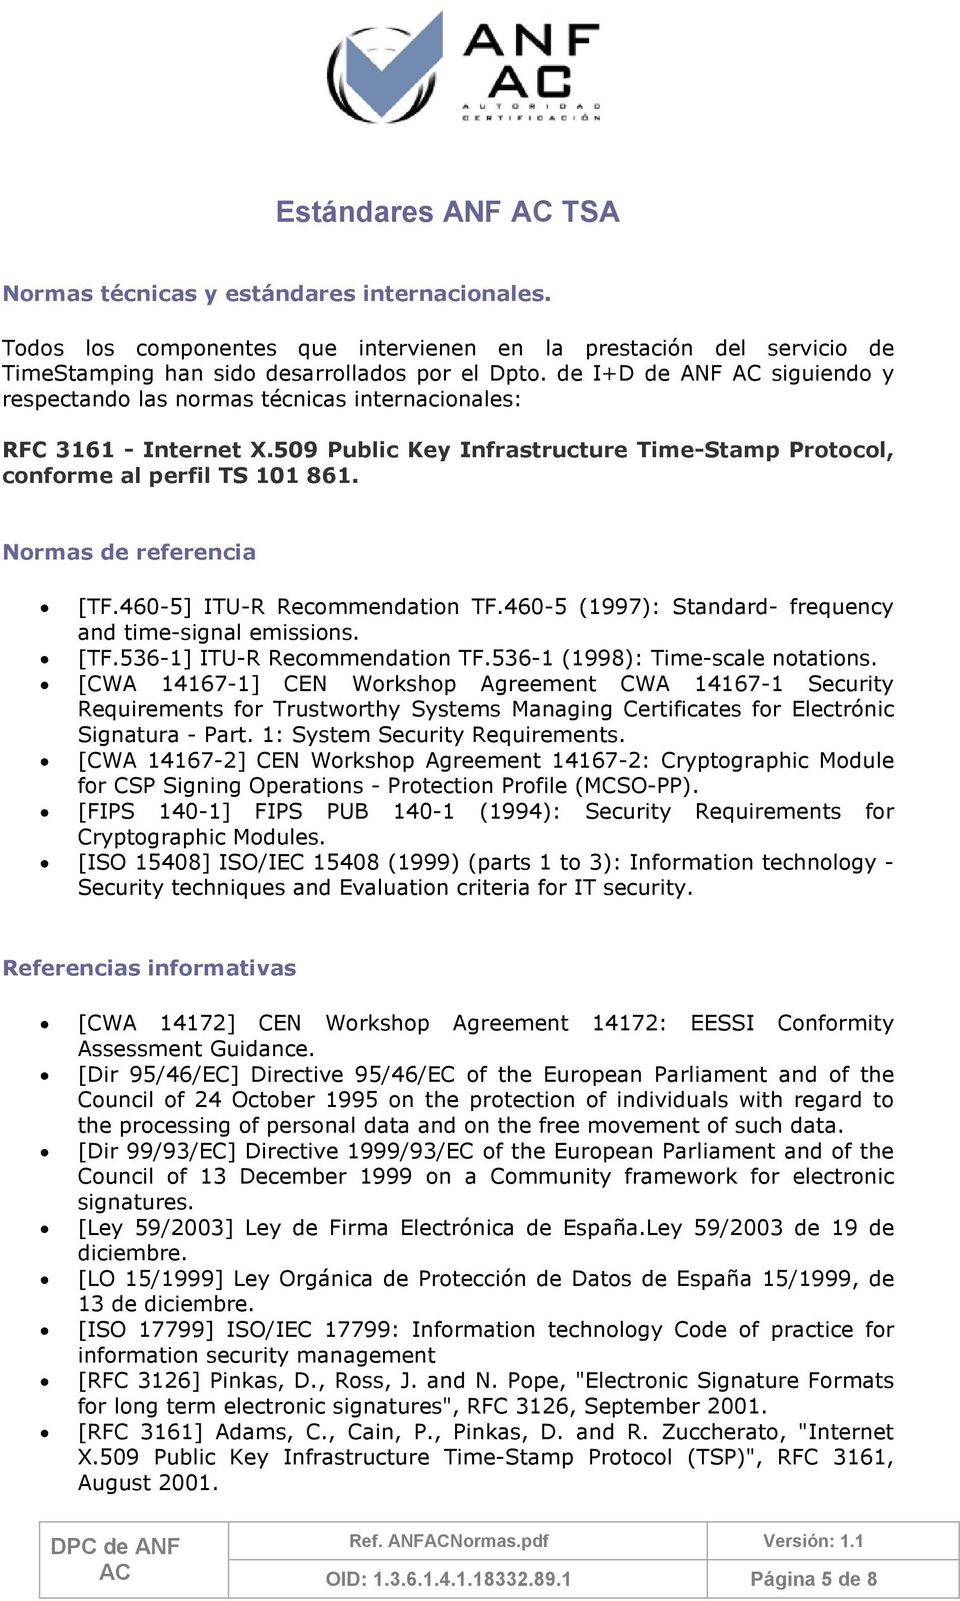 Normas de referencia [TF.460-5] ITU-R Recommendation TF.460-5 (1997): Standard- frequency and time-signal emissions. [TF.536-1] ITU-R Recommendation TF.536-1 (1998): Time-scale notations.